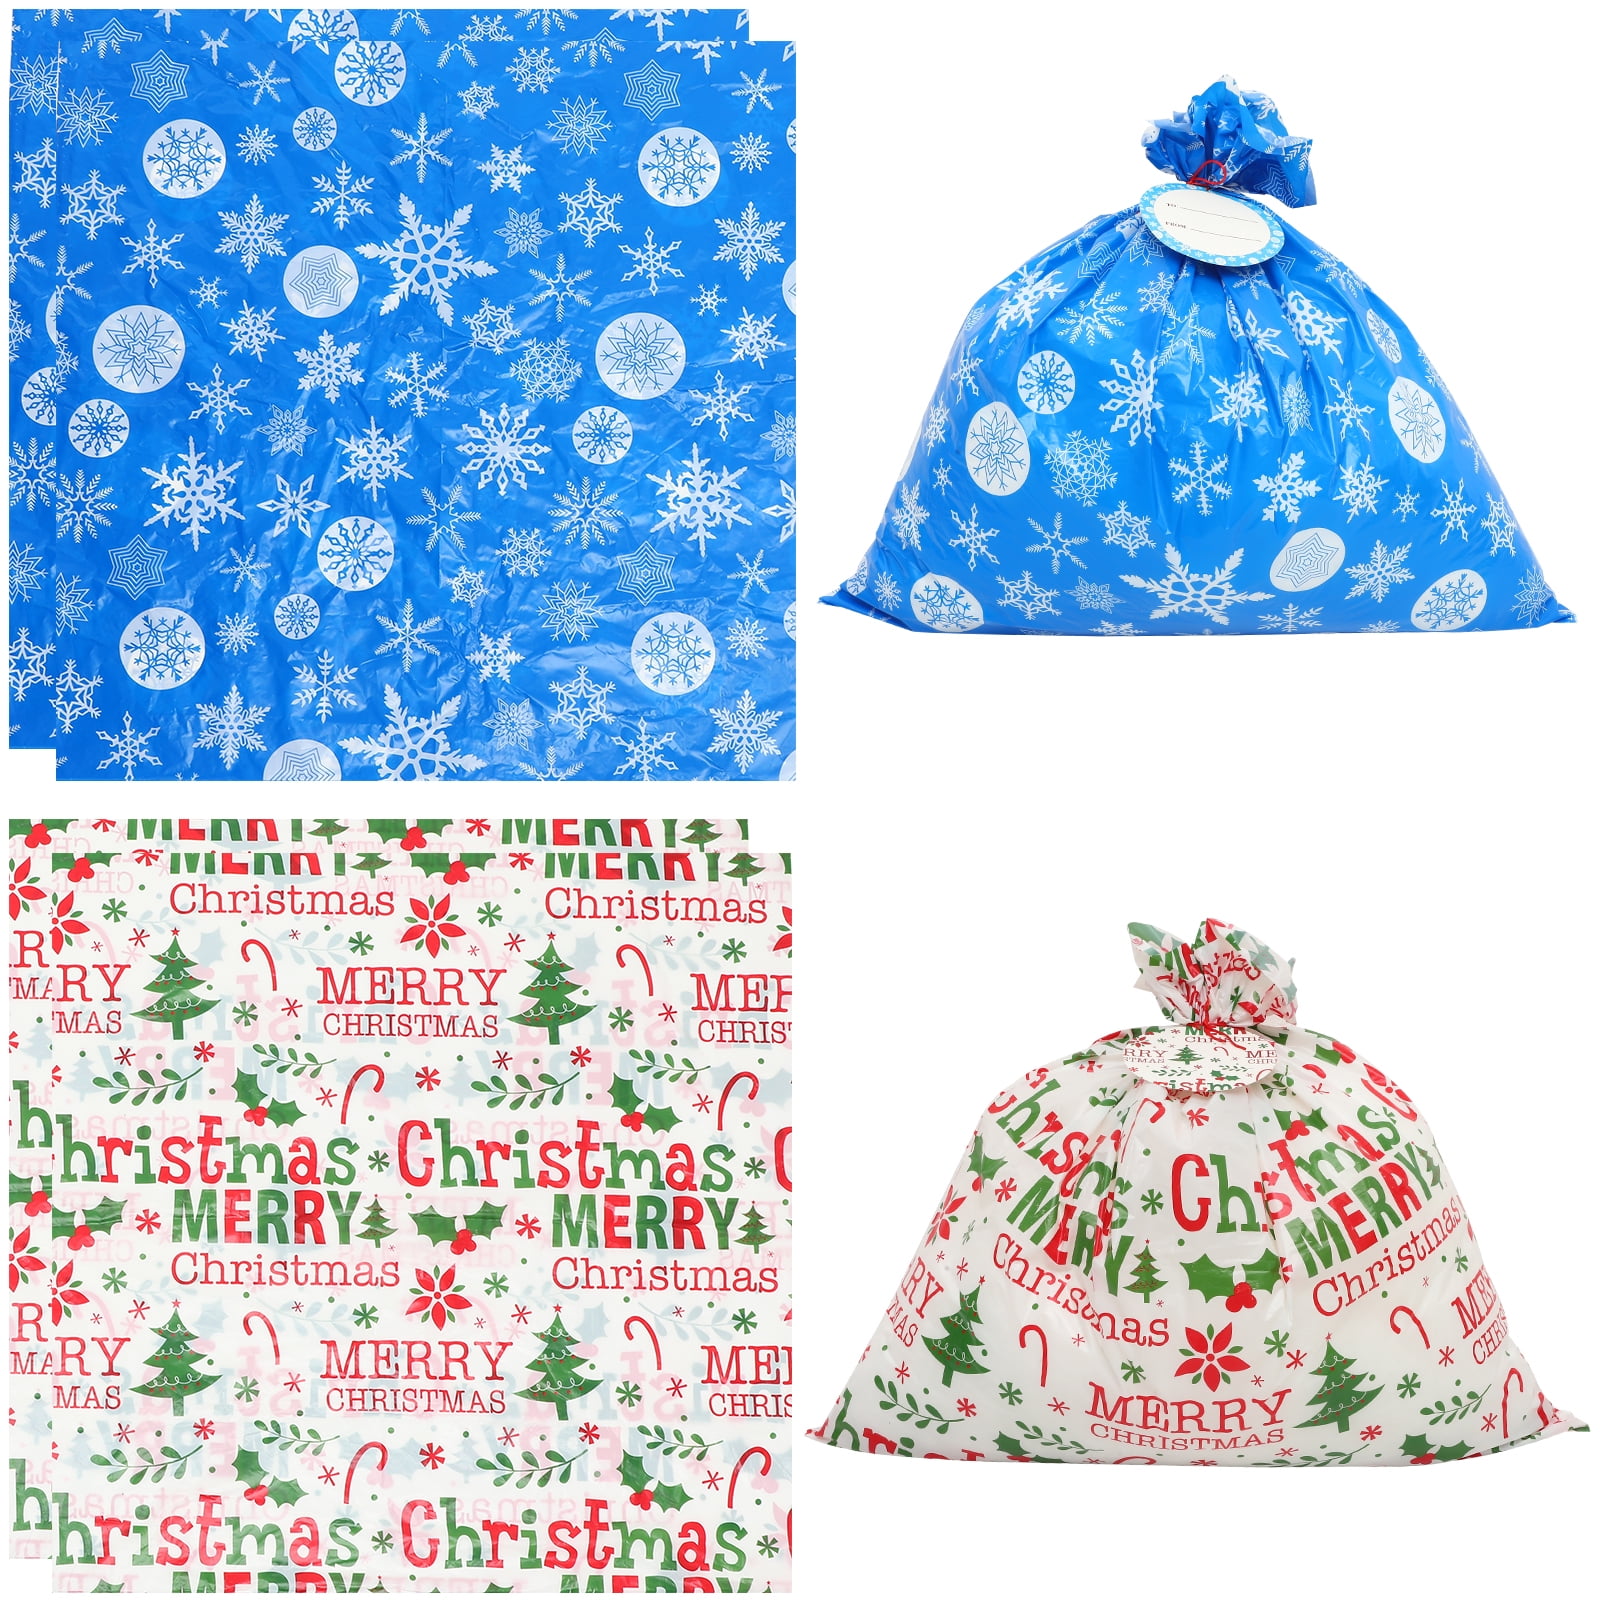 10.4 x 5.7 x 13 Holiday Gift Bag w/ Tissue Paper (3-pack)